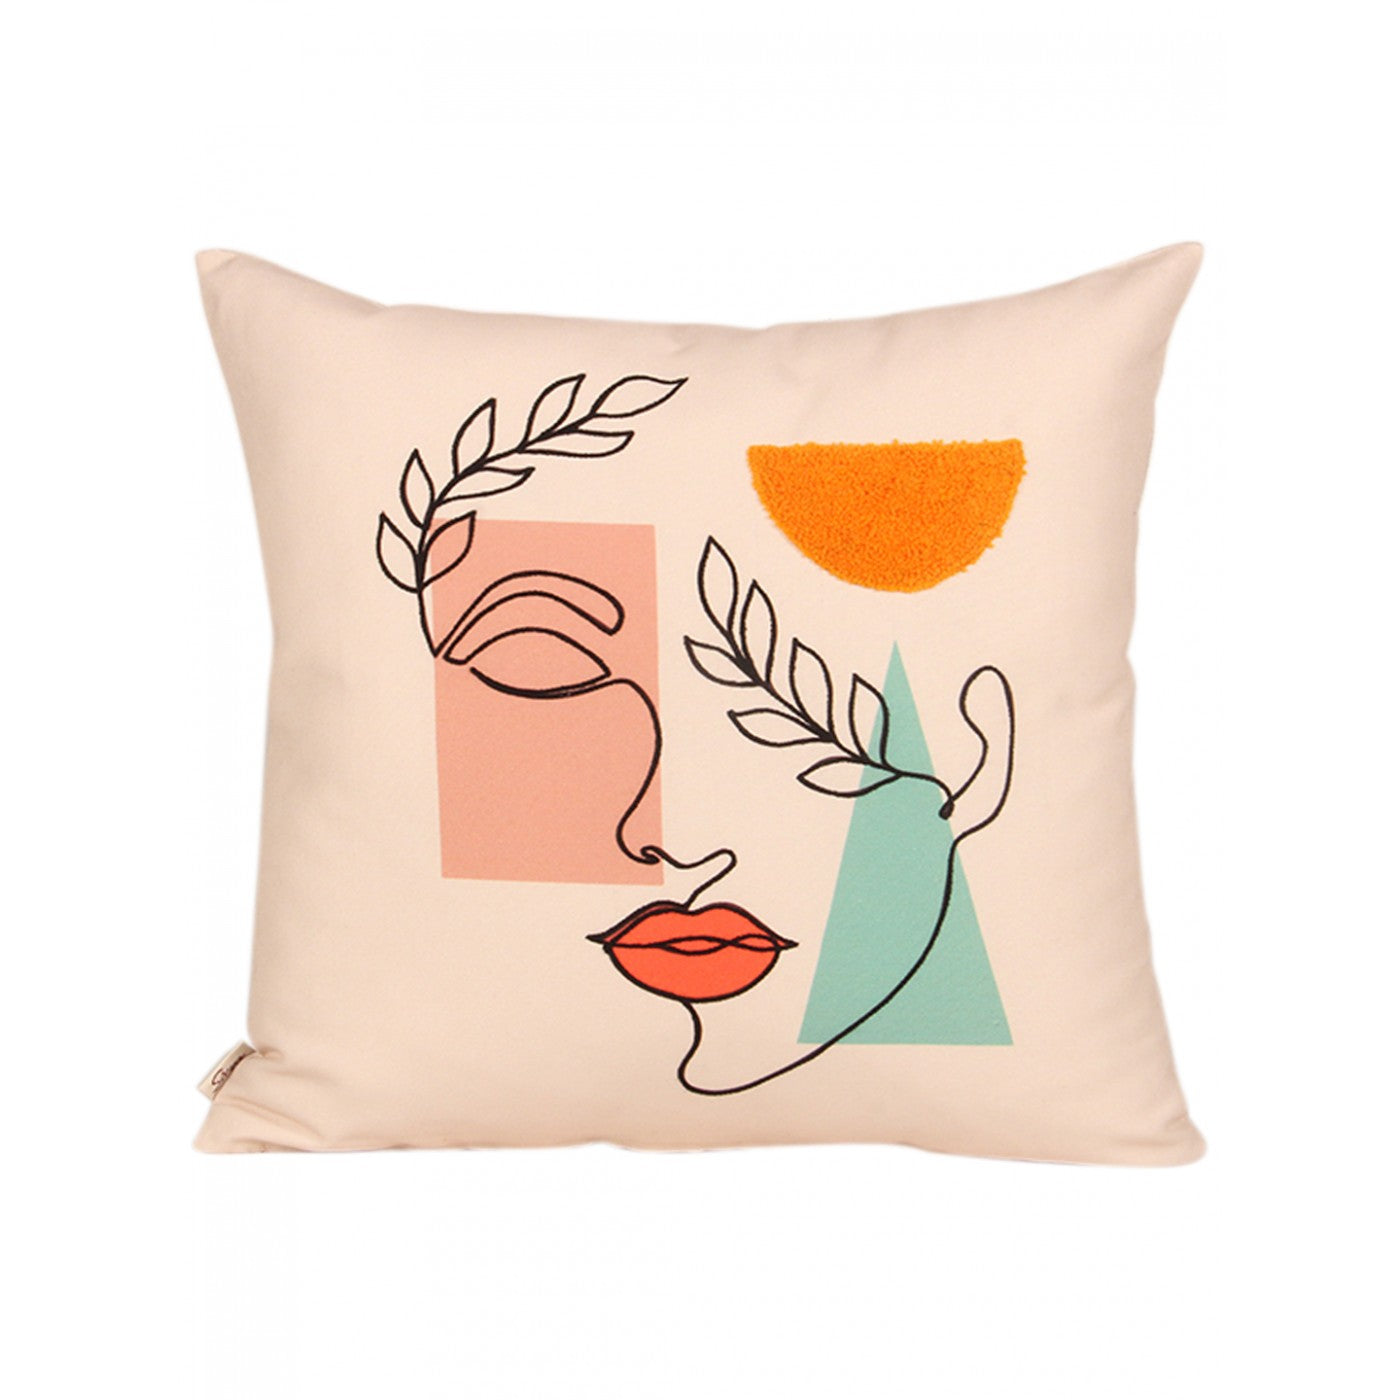 Artistic 18x18 Inch Embroidered Face Print Cushion Cover